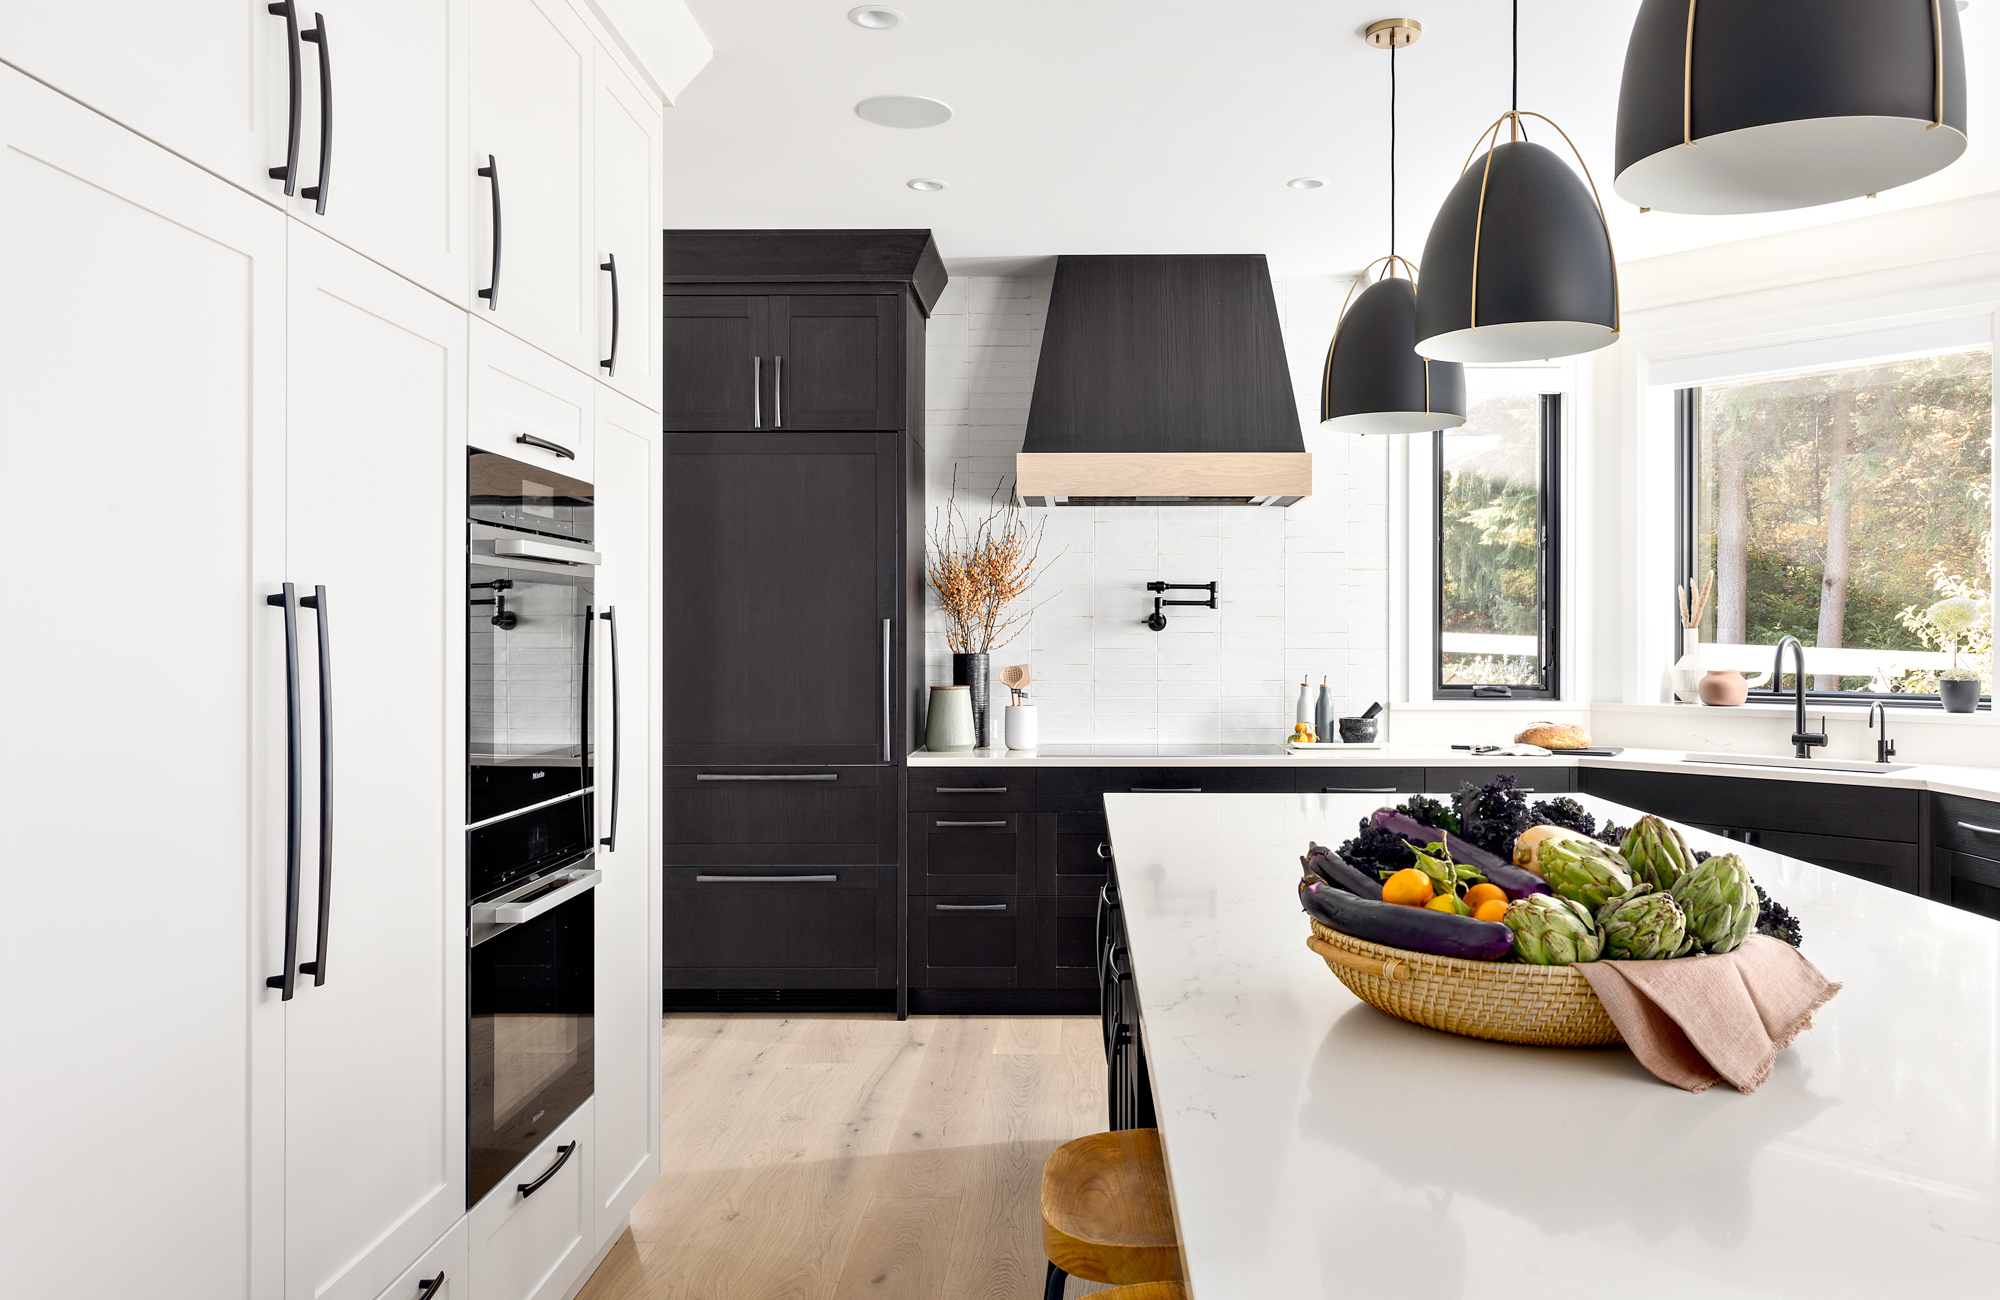 Simply Home-larkhall-north-vancouver-kitchen-corner-sink-modern-white-millwork-black-double oven-hood